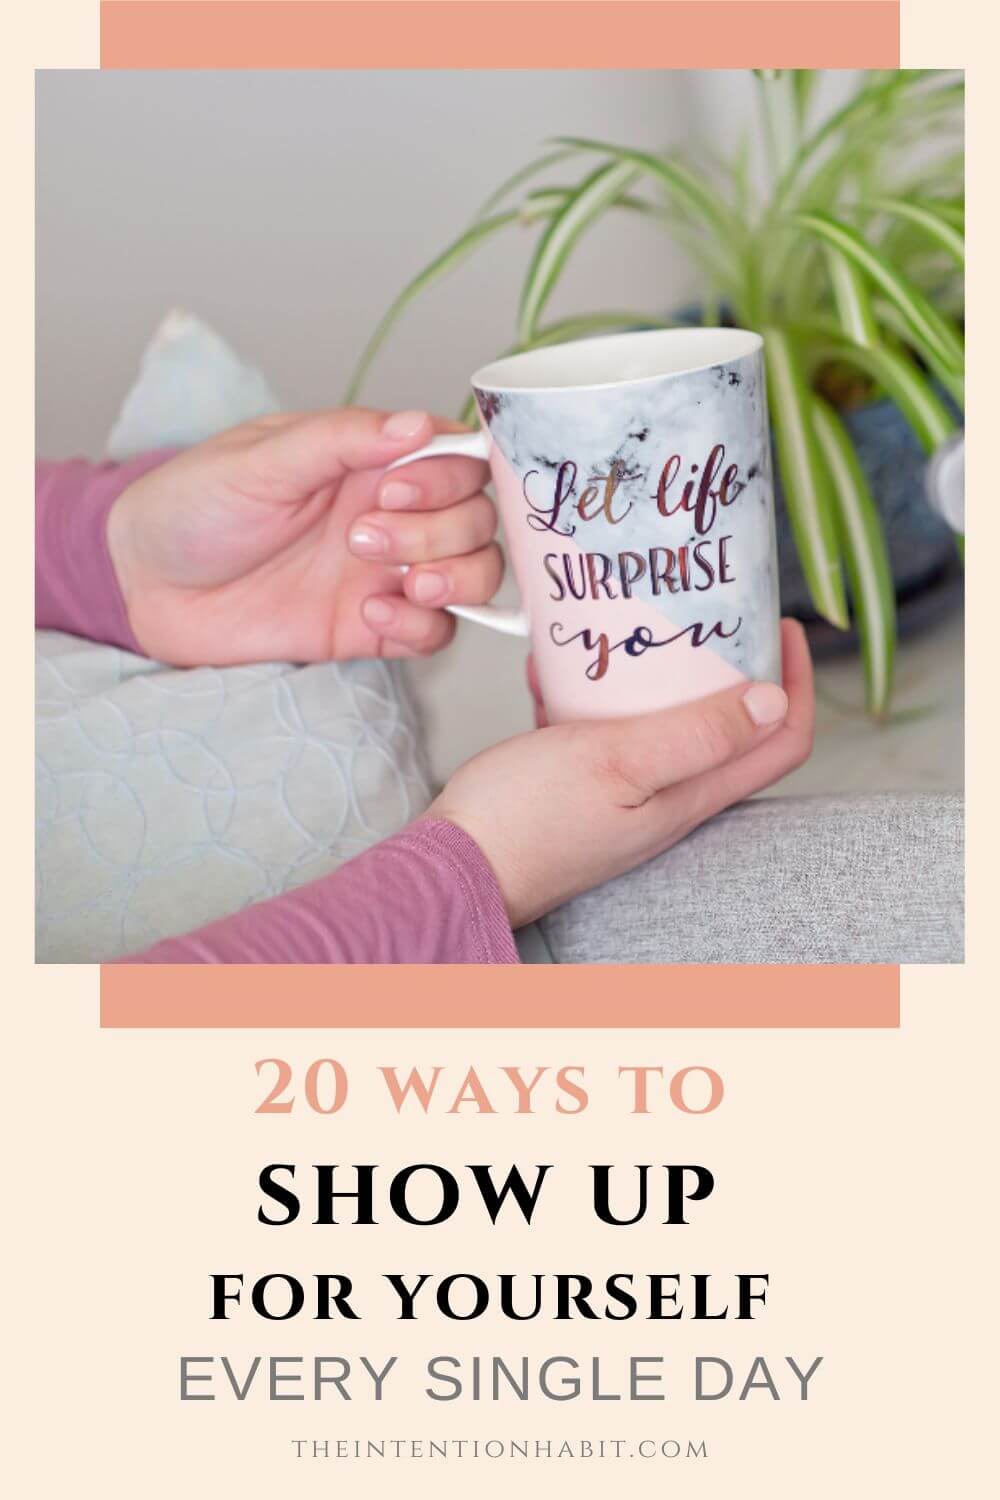 20 ways to show up for yourself every single day.